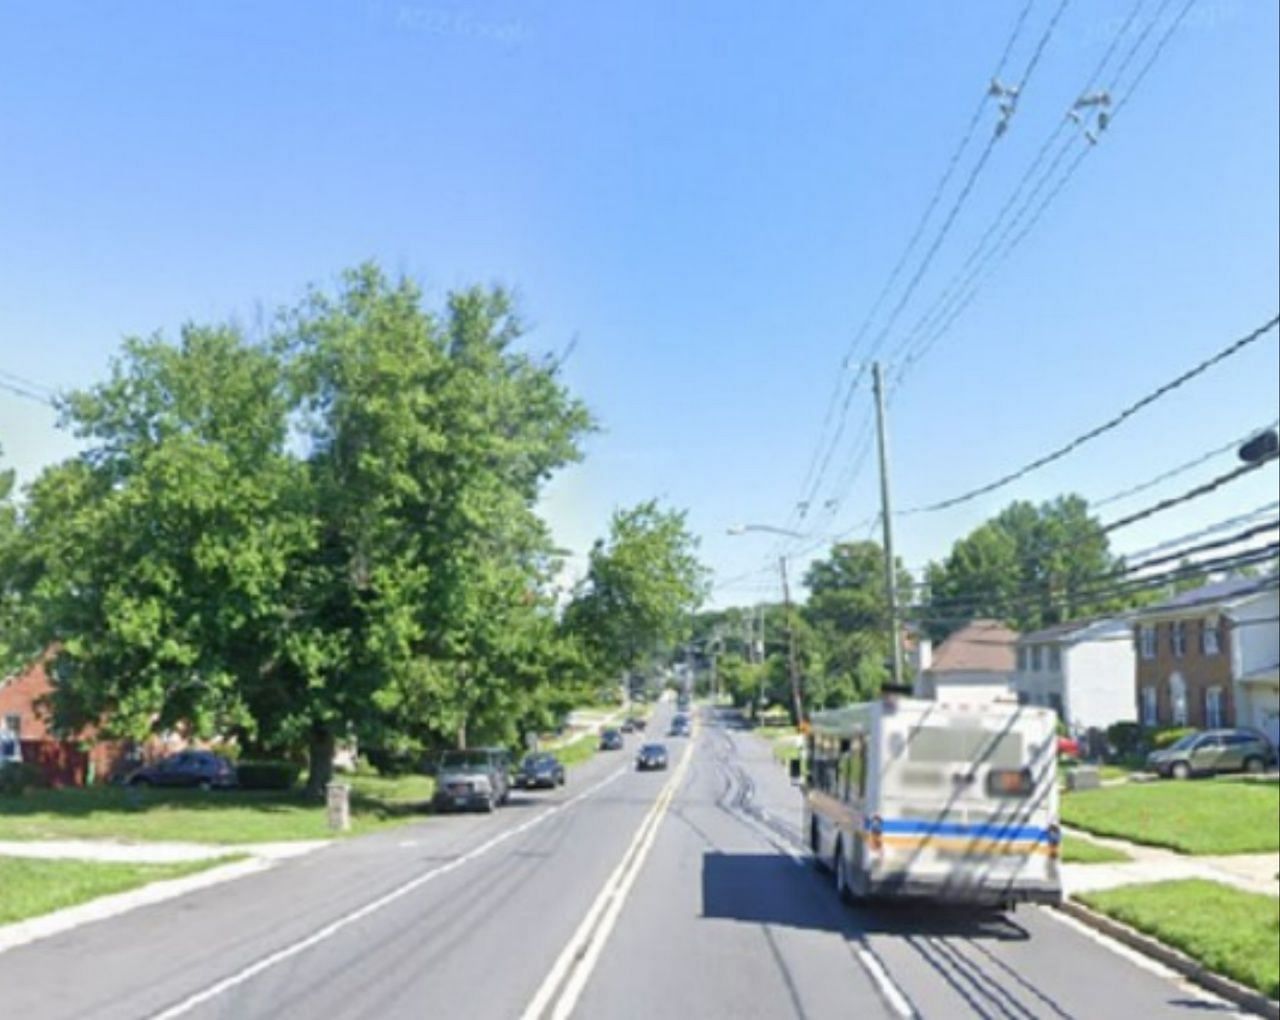 Maryland street where police conducted a welfare check on Margaret Craig (Image via Google Maps)